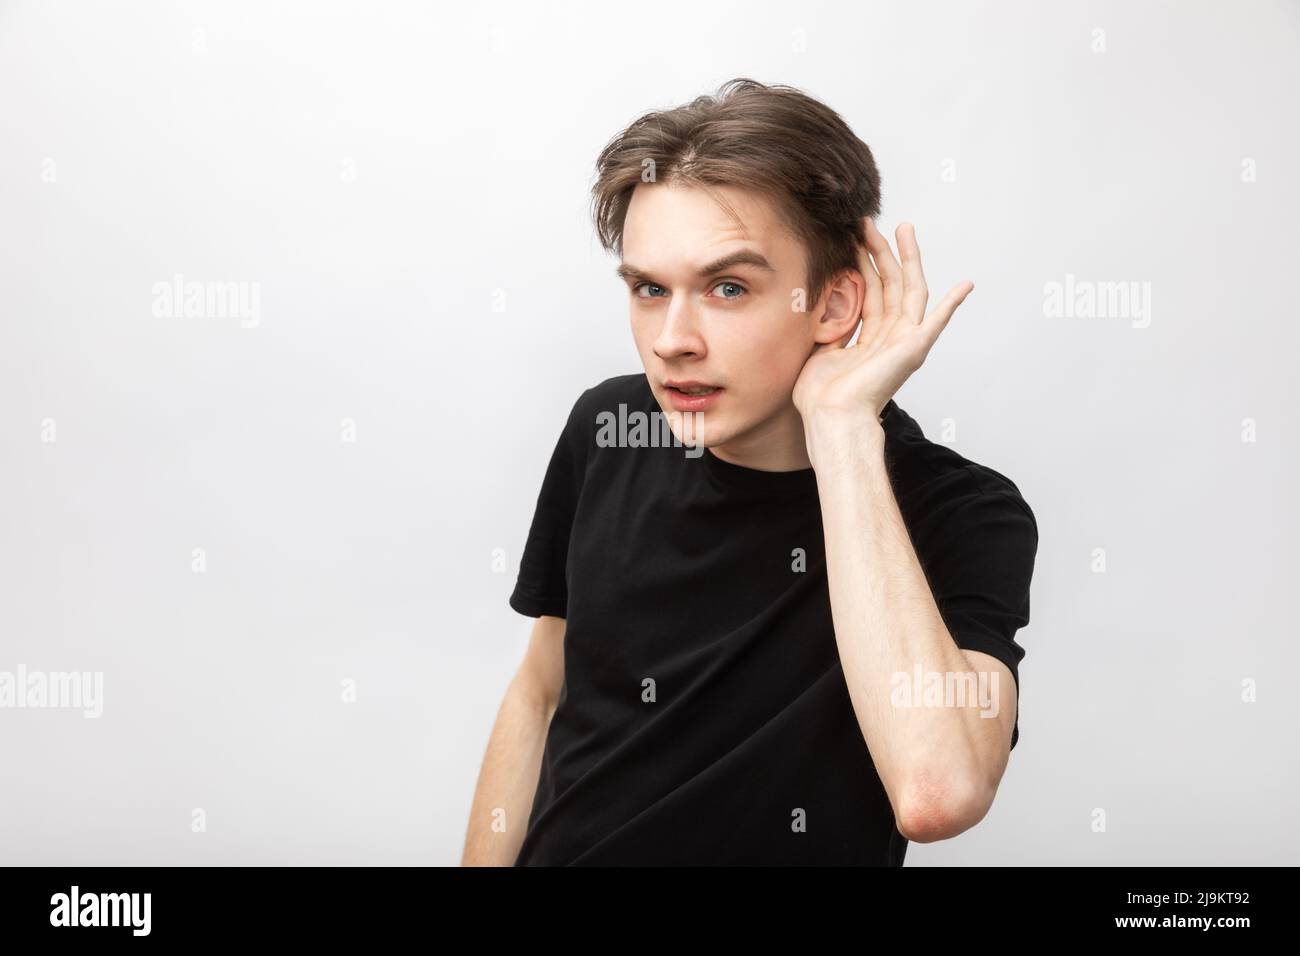 Portrait of young man wearing black tshirt listening holding hand near ear looking at camera. Studio shot on gray background Stock Photo